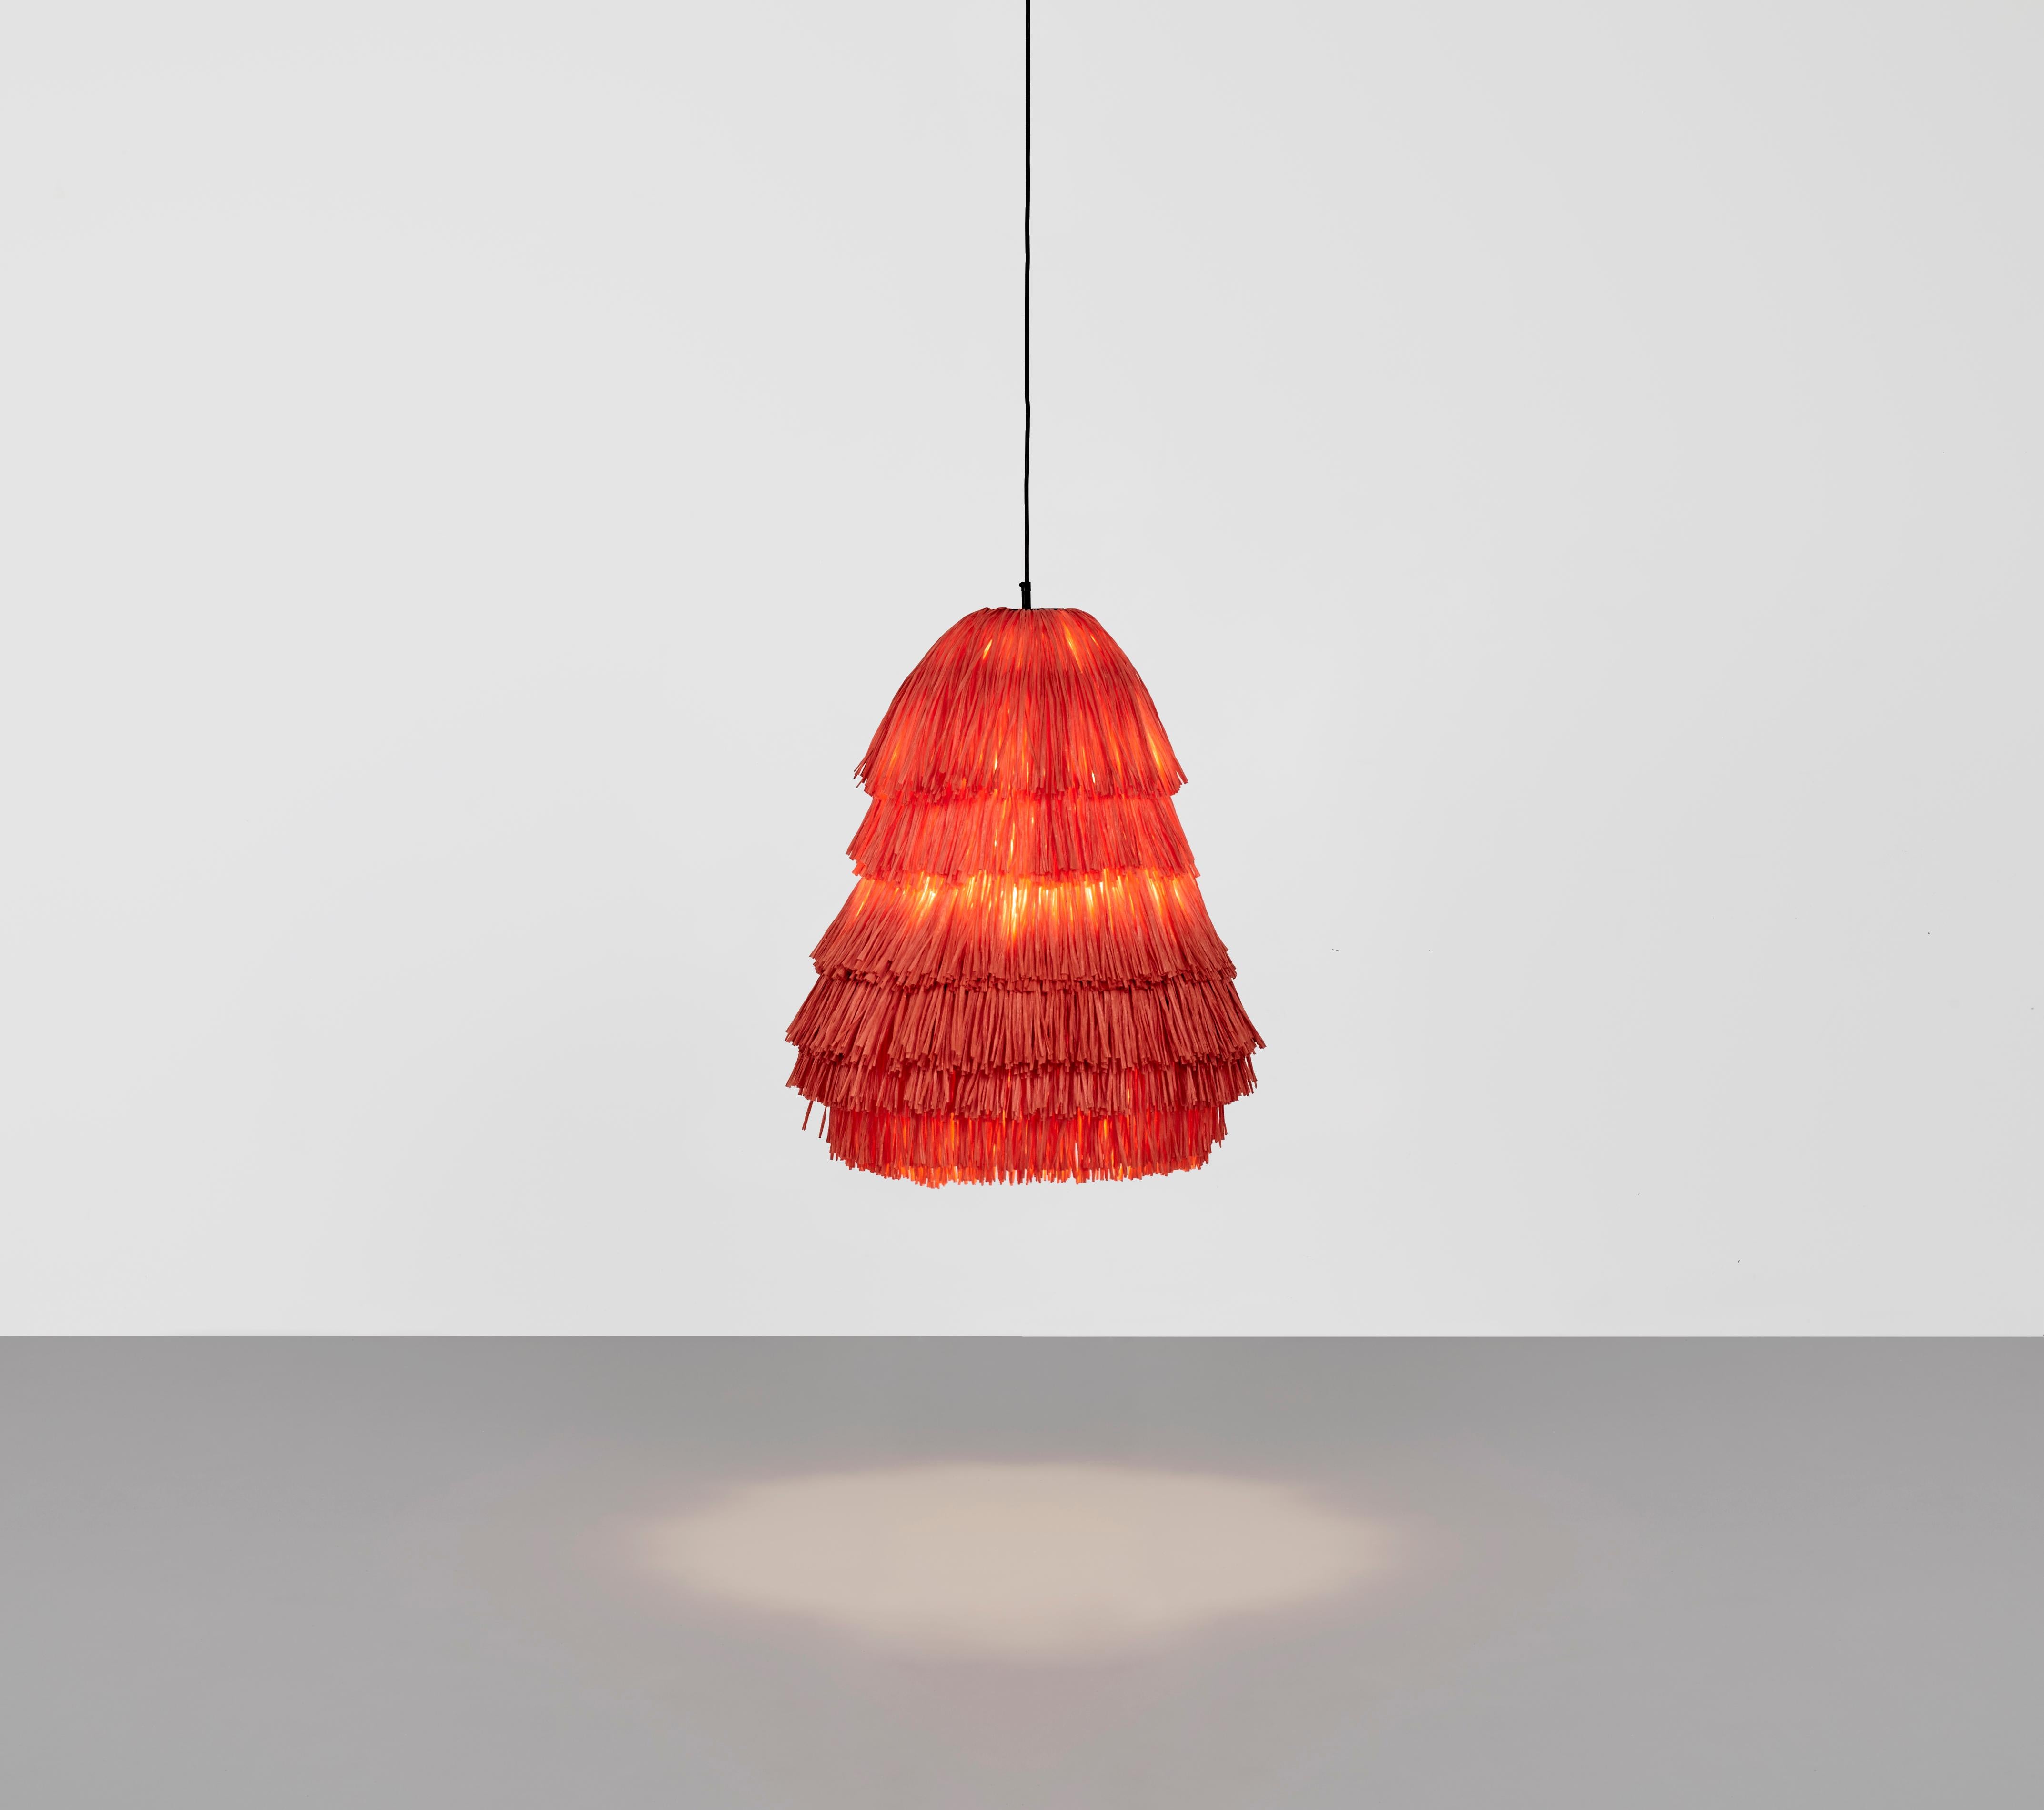 Beige Fran RS Lamp by Llot Llov
Handcrafted Light Object
Dimensions: Ø 60 cm x H: 70 cm
Materials: raffia fringes
Colour: beige
Also available in green, red, black. 

With their bulky silhouette and rustling fringes, the FRAN lights are